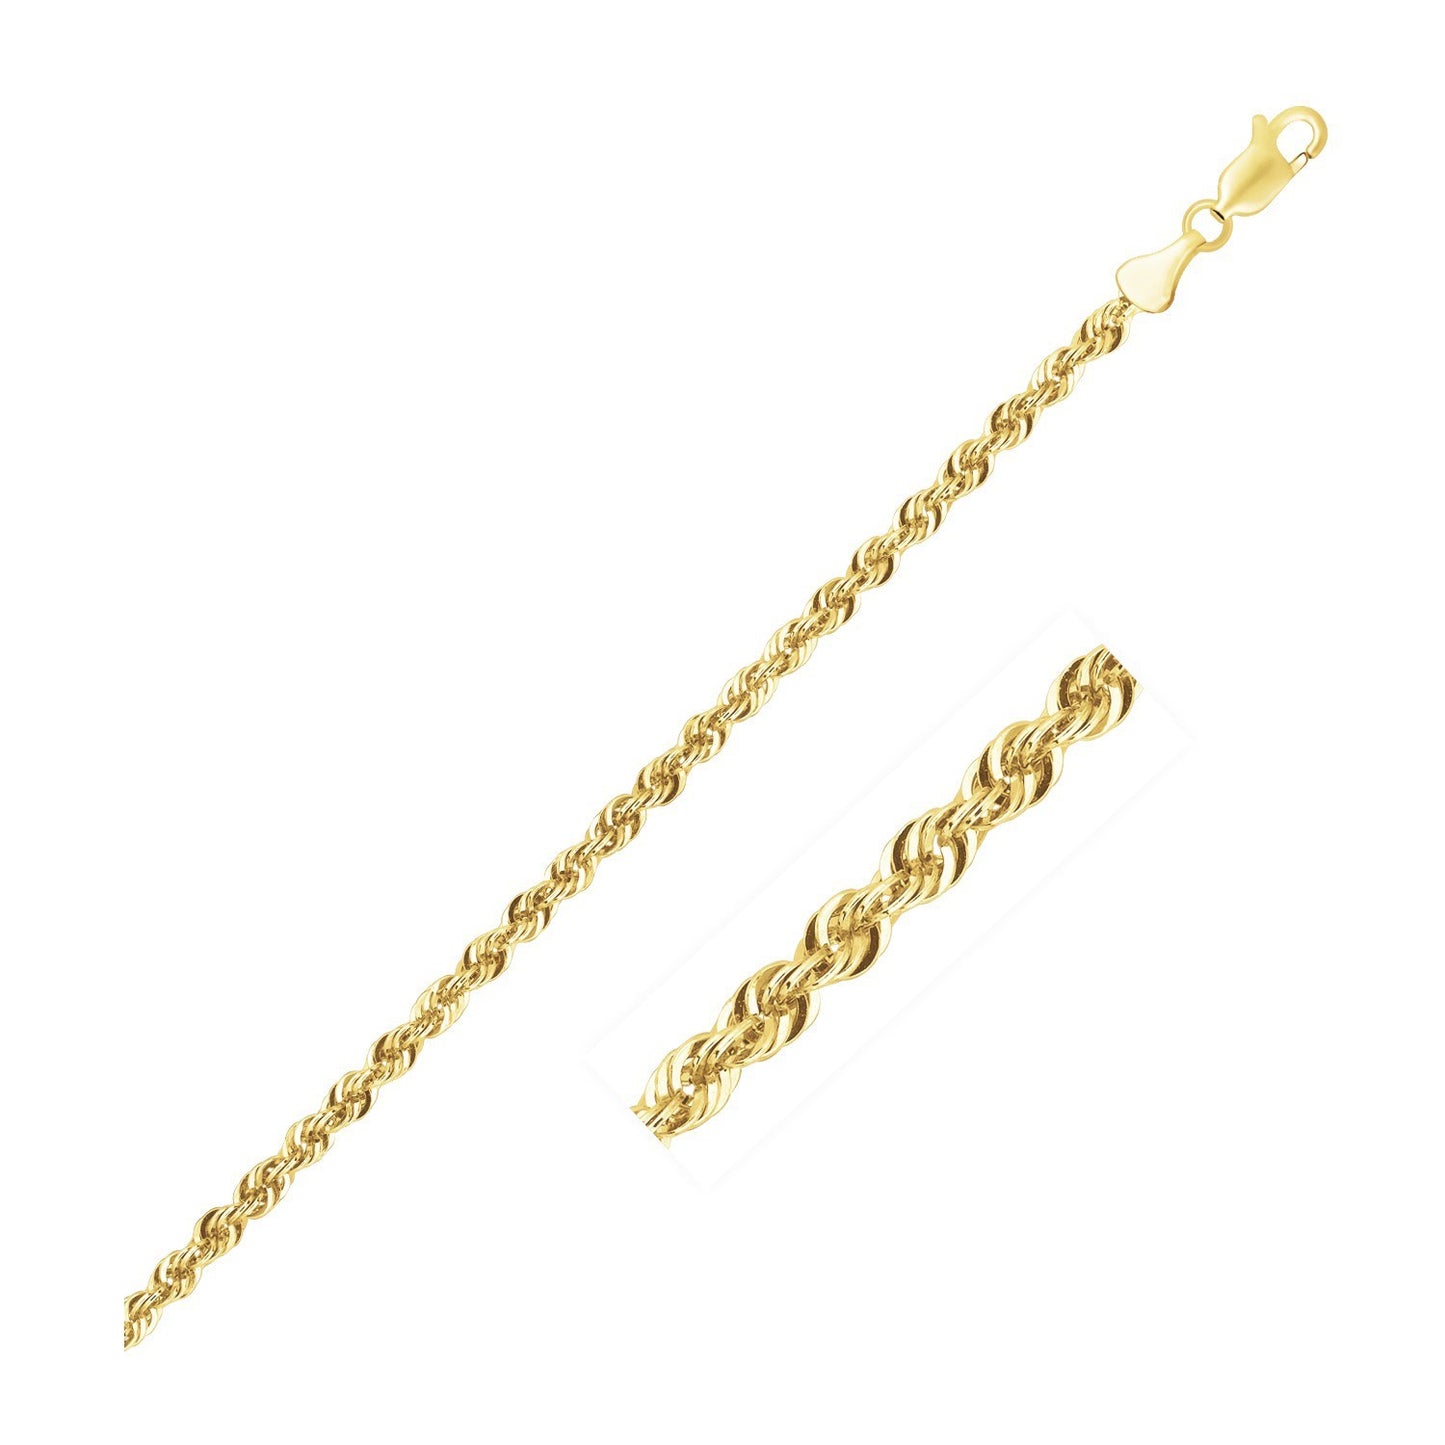 Lite Rope Chain Bracelet in 10k Yellow Gold (2.5 mm)